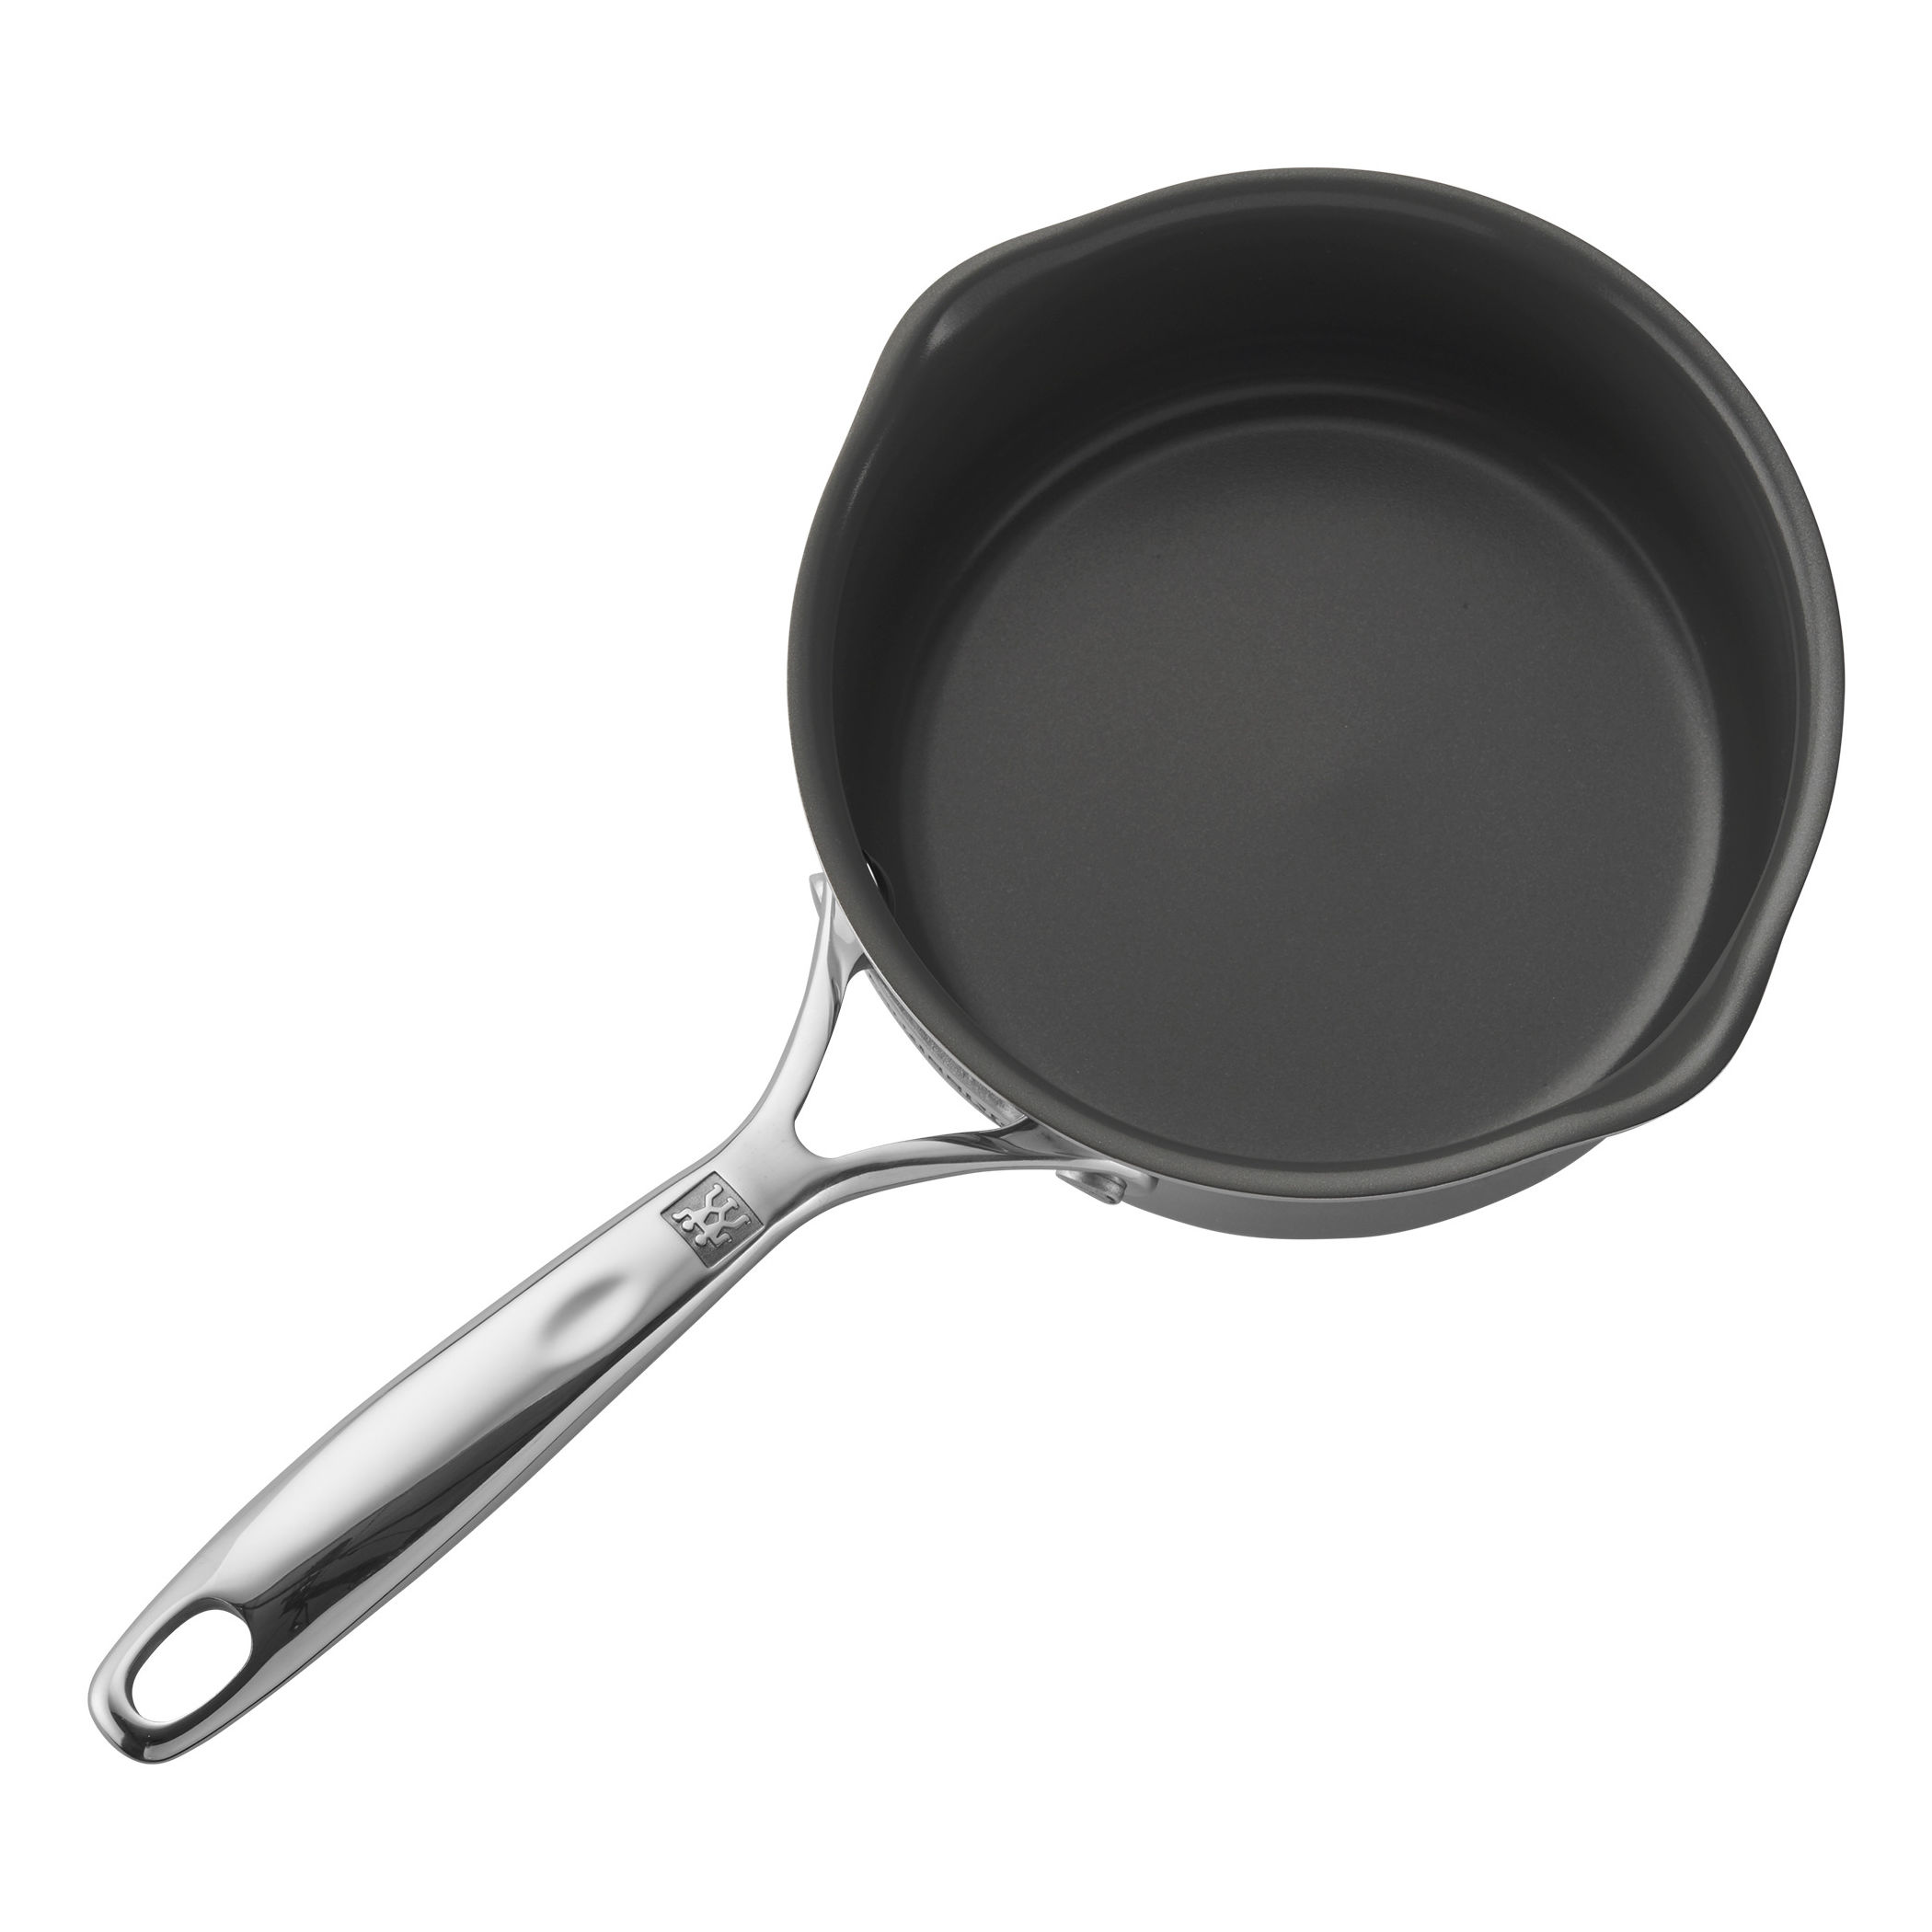 Zwilling Energy Plus 2-qt Stainless Steel Ceramic Nonstick Tall